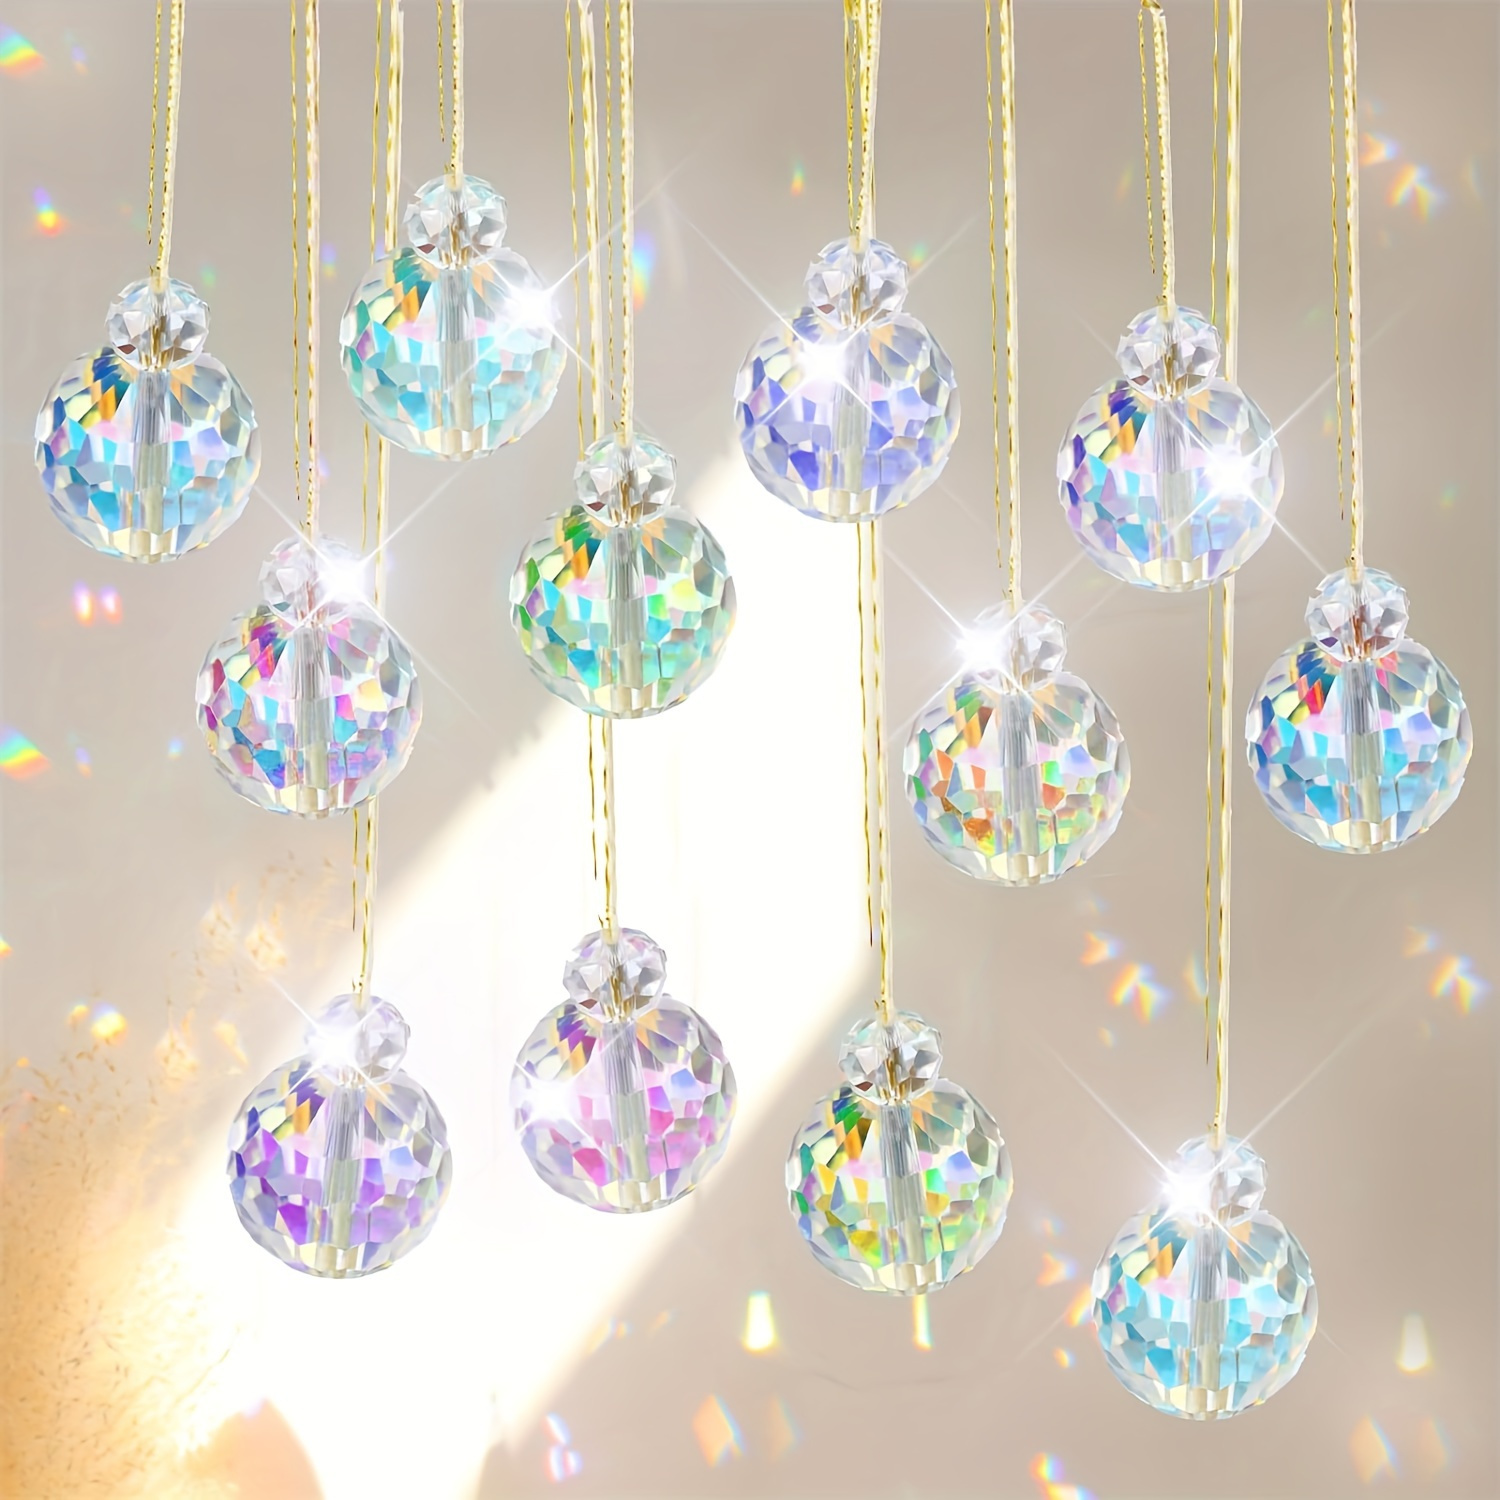 

12-piece Sparkling Crystal Christmas Ornaments - Colorful Glass Tree Decorations & Sun Catchers For Festive Home & Office Ambiance - Ideal Gift For Holidays And Themed Parties Holiday Decorations